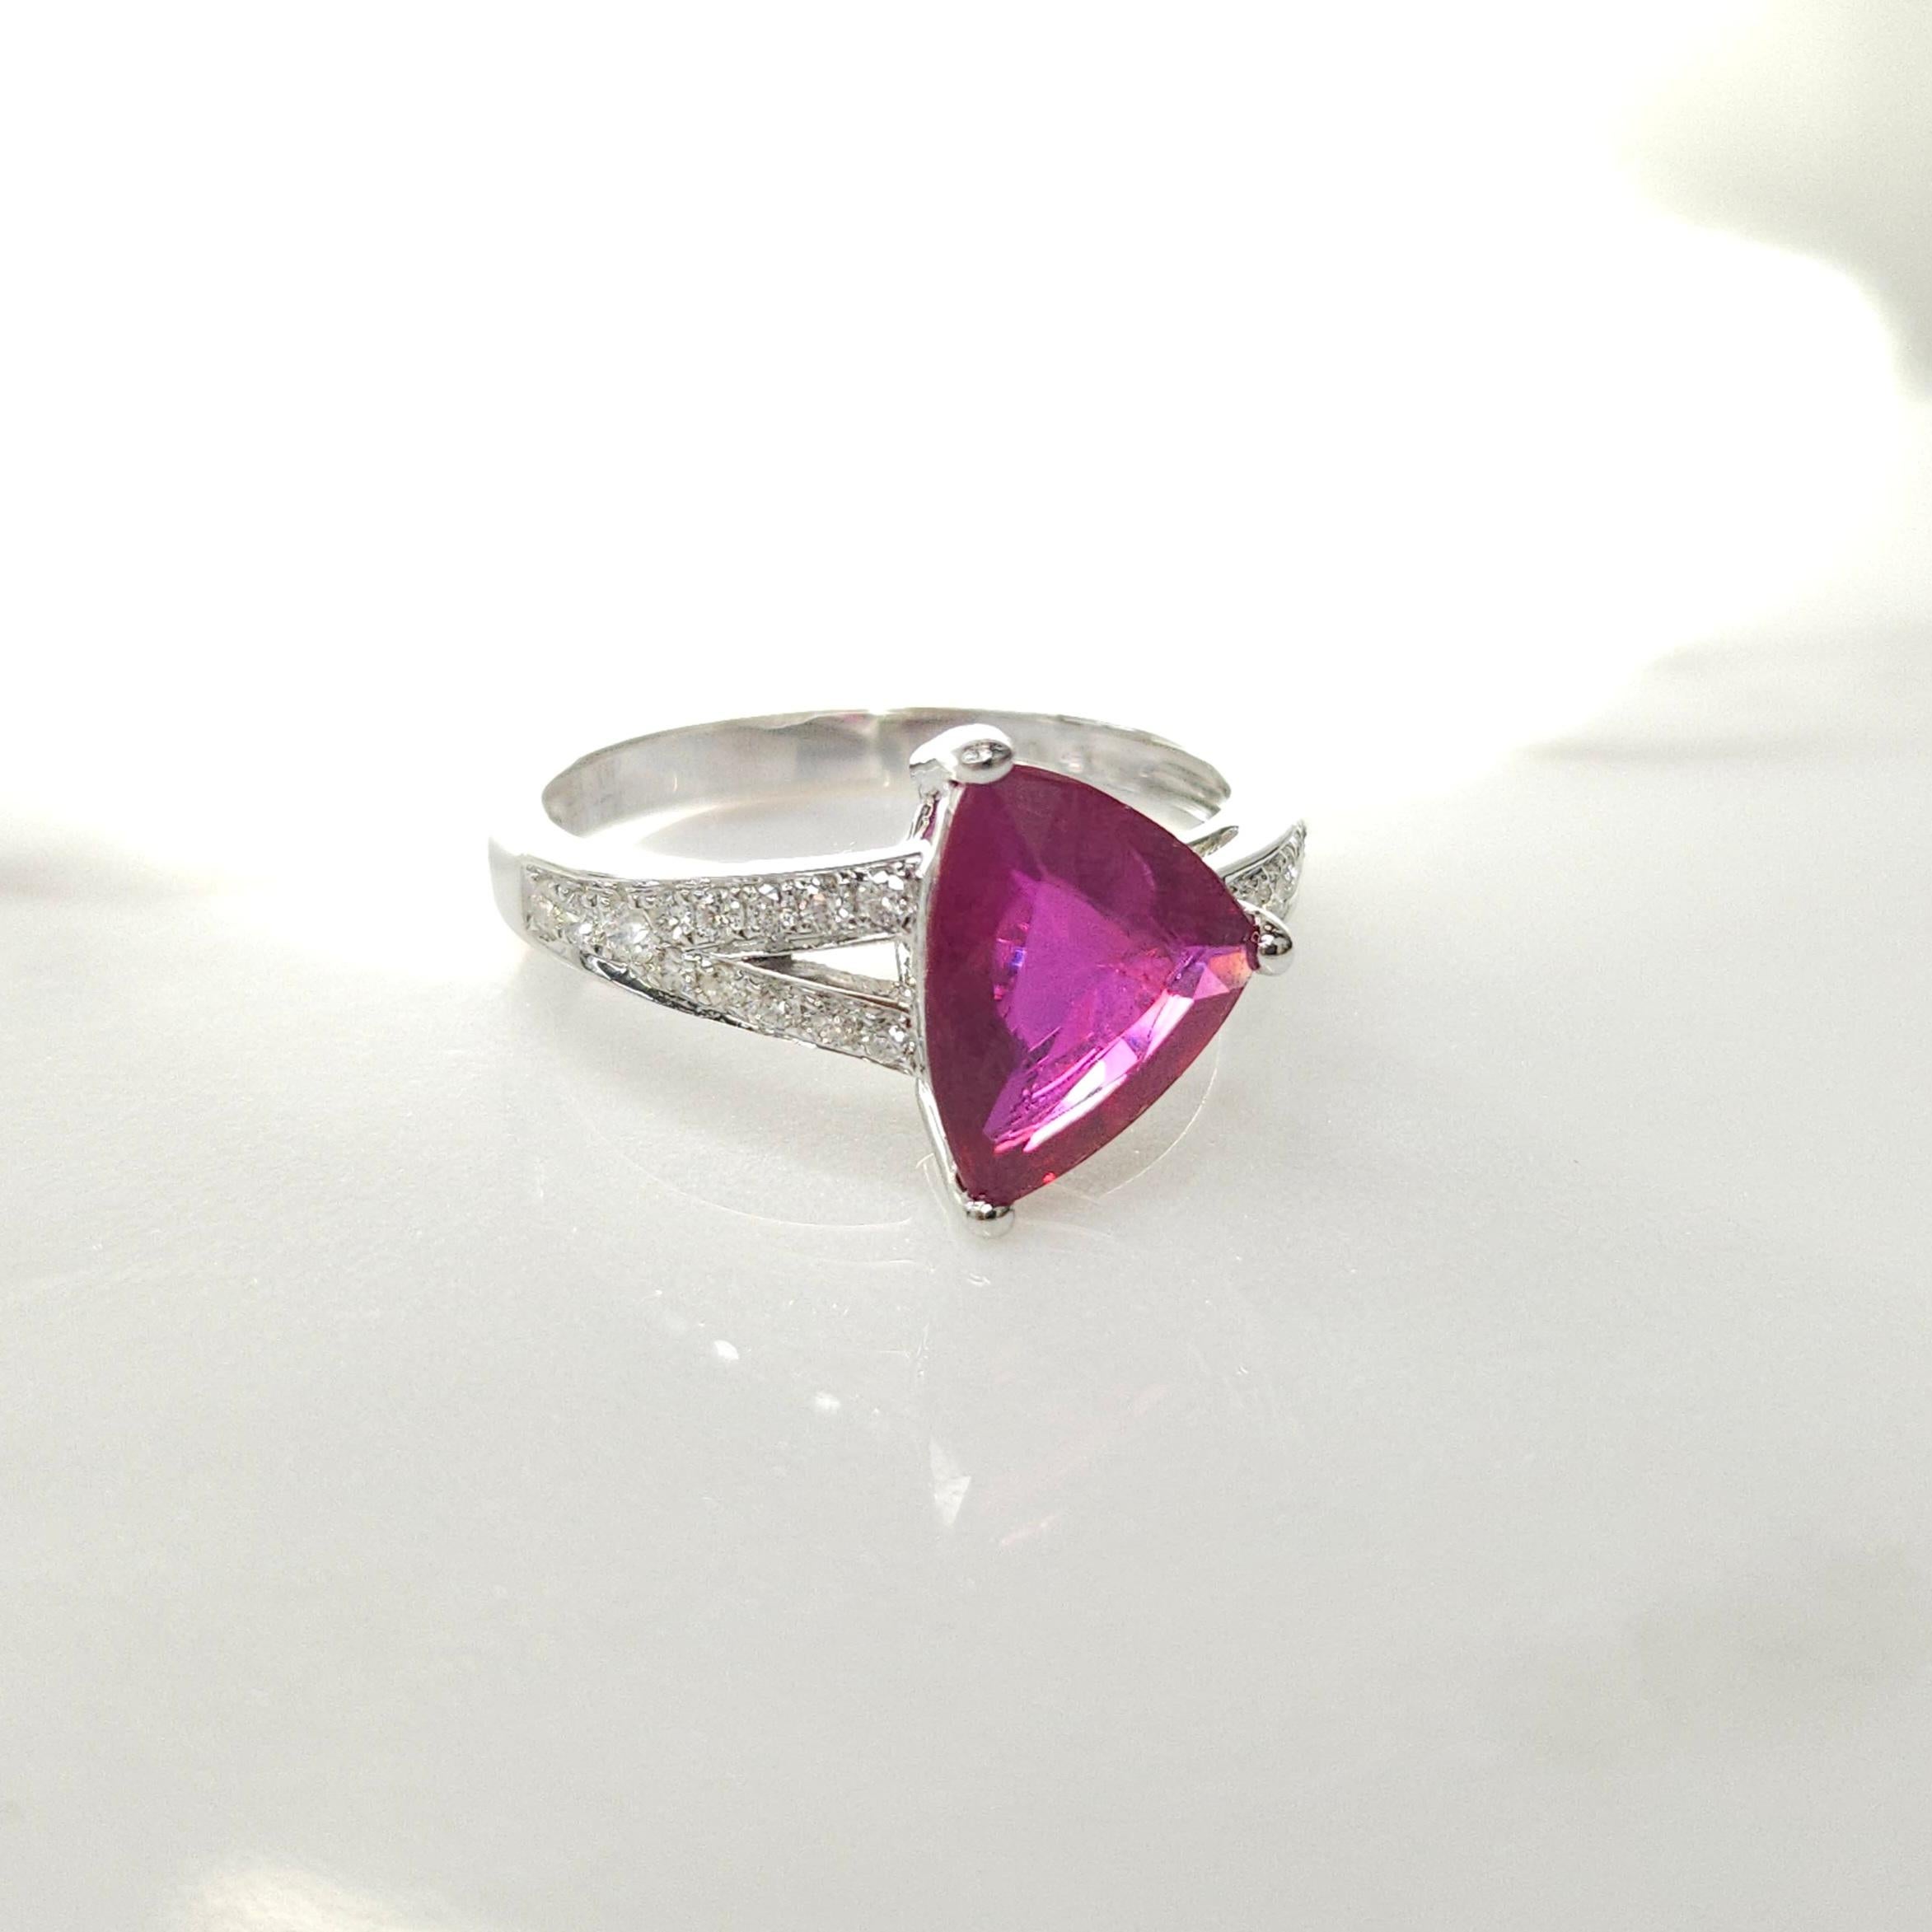 Step into the world of sophistication and elegance with this stunning cocktail-style ring featuring an IGI Certified 2.09 Carat ruby in an intense purplish-red hue, expertly crafted into a unique and dazzling triangular shape that captivates the eye